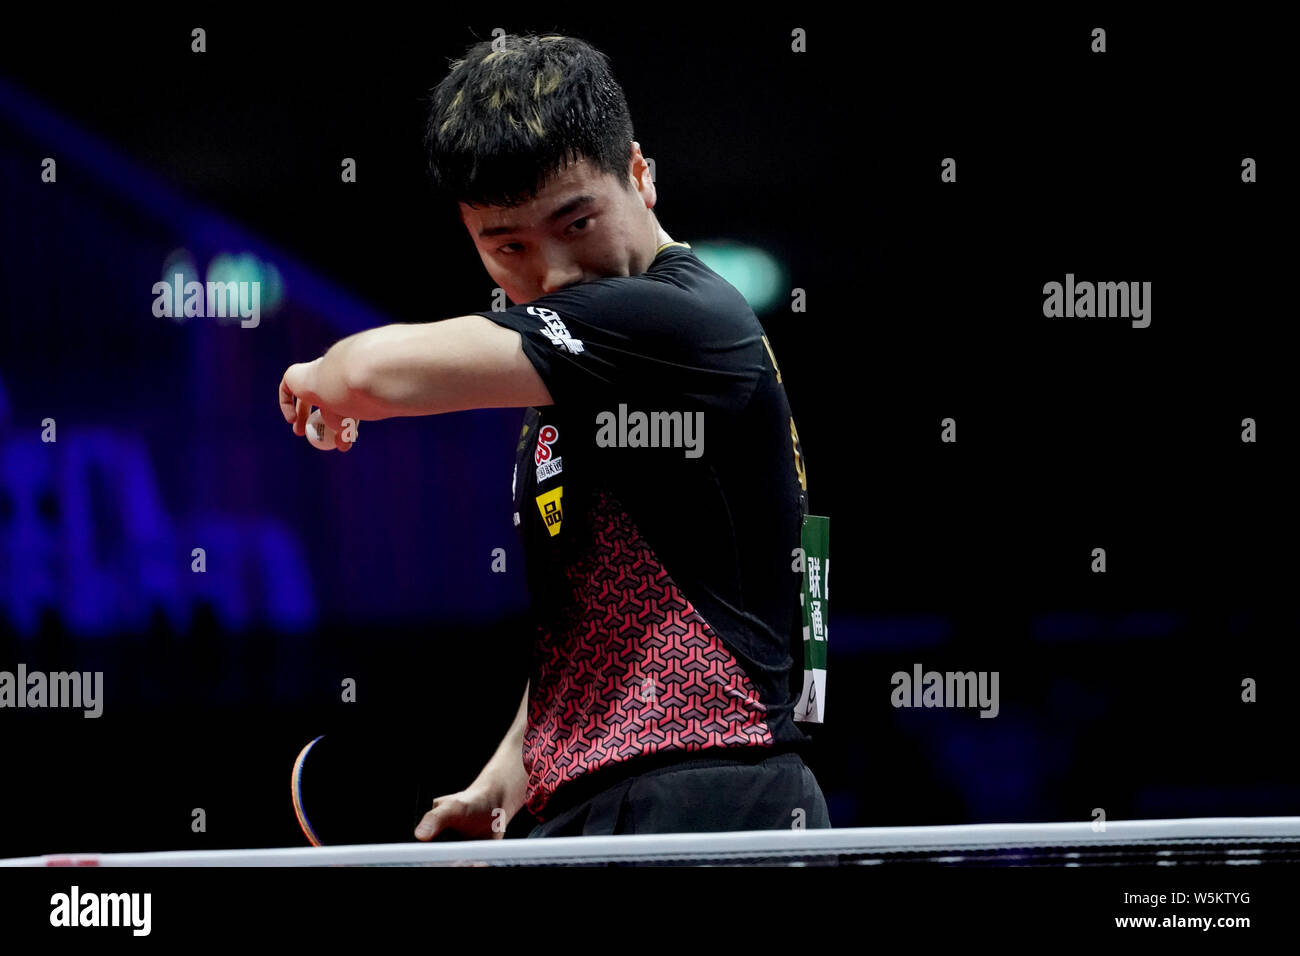 Liang Jingkun of China reacts as he competes against Panagiotis Gionis of Greece in their third round match of Men's Singles during the Liebherr 2019 Stock Photo